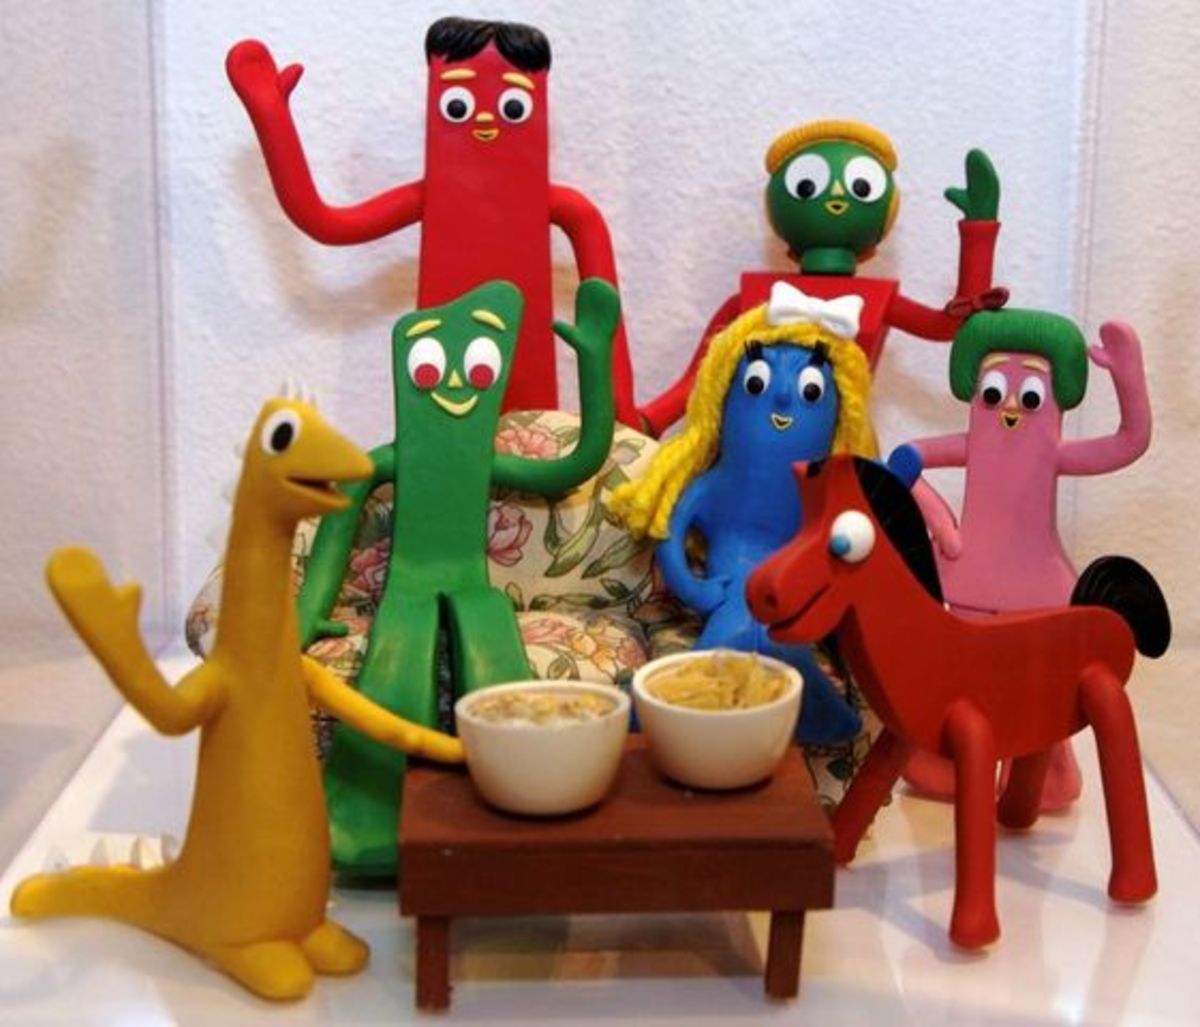 Gumby Cartoon & TV Character Action Figures 1980-1989 Time Period  Manufactured for sale | eBay